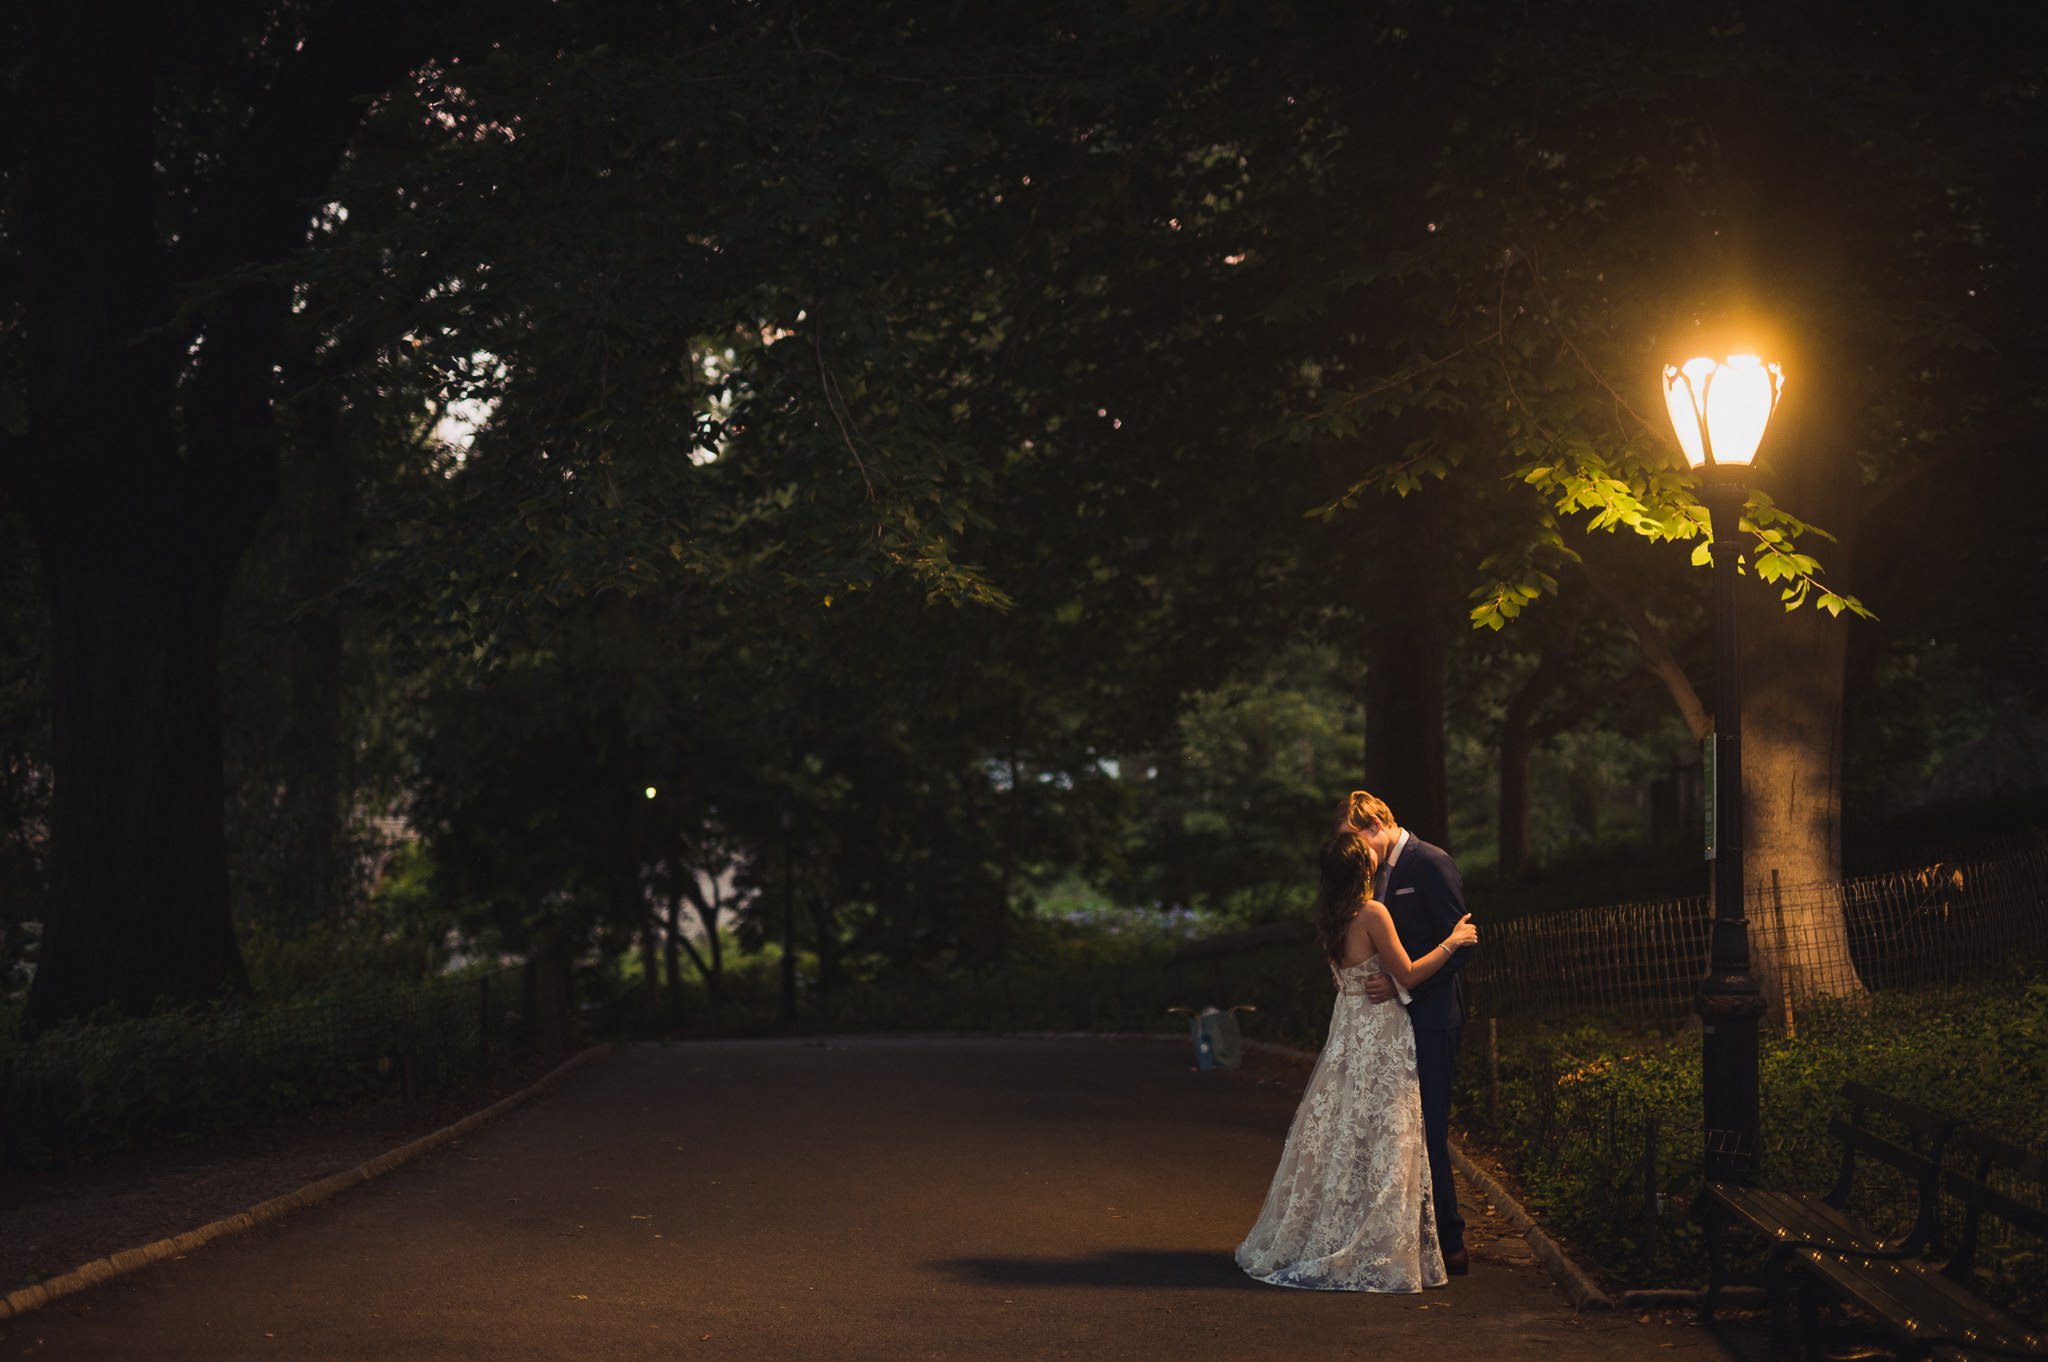  wedding bridal session for Wendy and Andreas in Central Park, near the bethesda terrace. We were just playing around with the time, trying to catch the light as the sun was setting. I think central park is a great location to take photos in, althoug